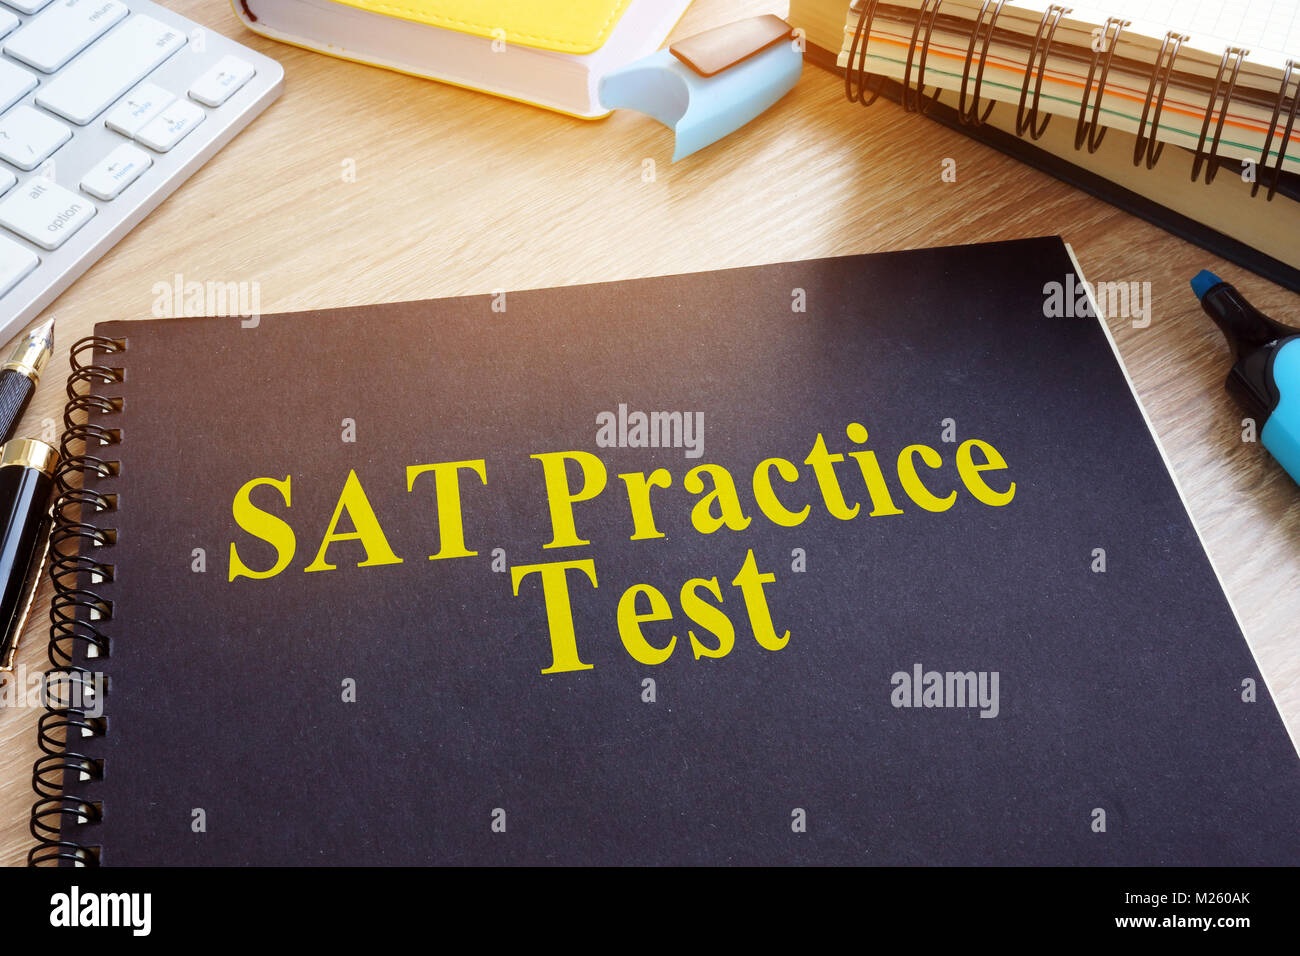 SAT Practice Tests with textbooks on a desk. Stock Photo